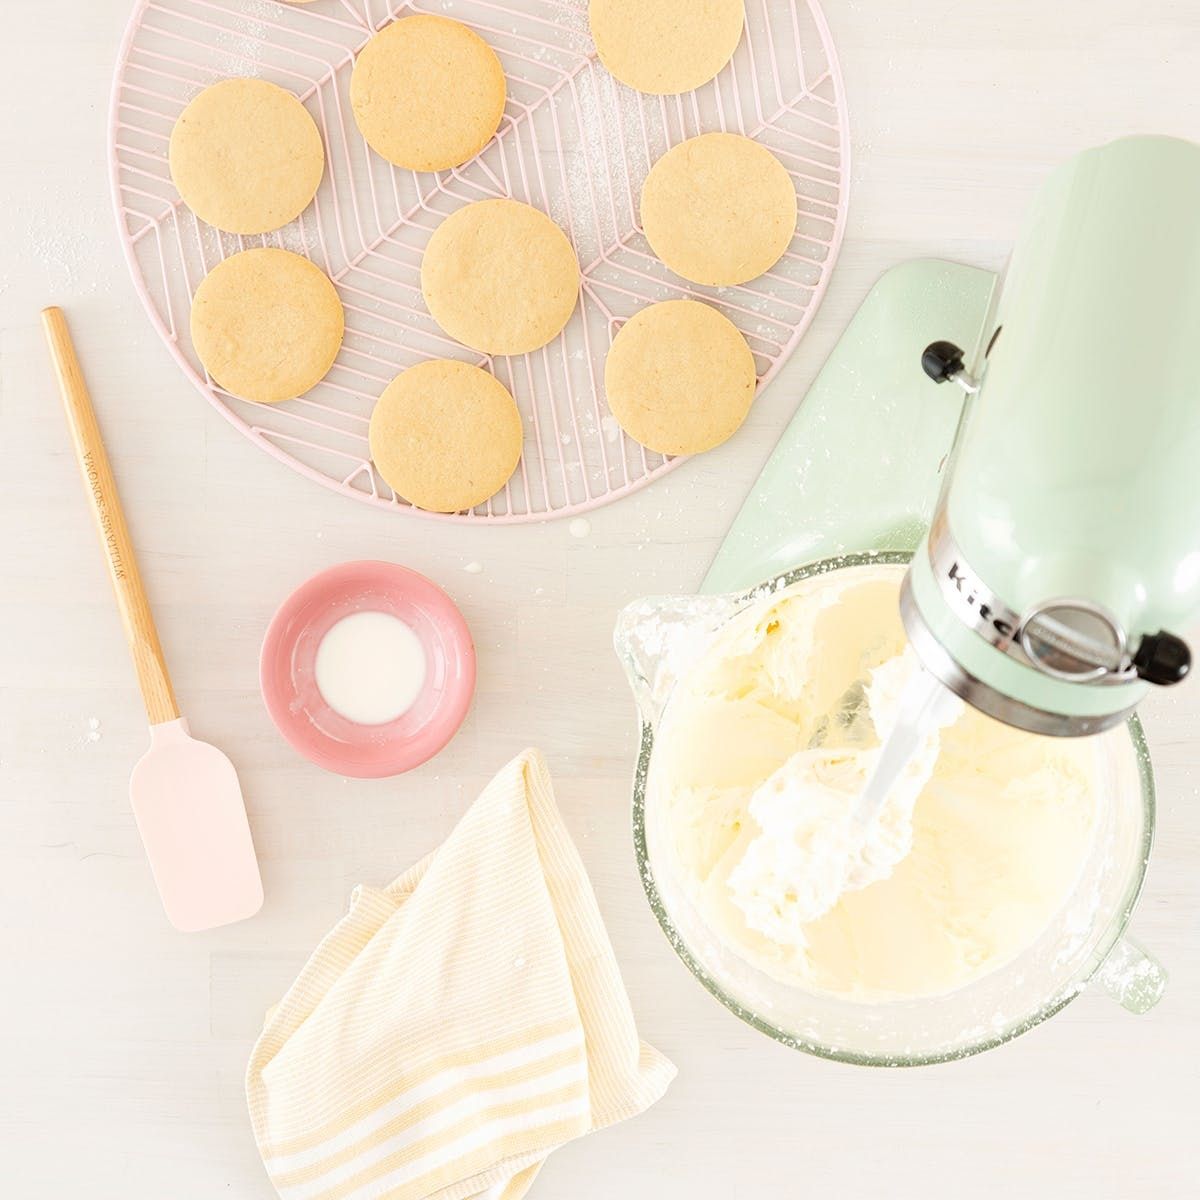 Use This Buttercream Frosting Recipe for All of Your Holiday Decorating Merriment